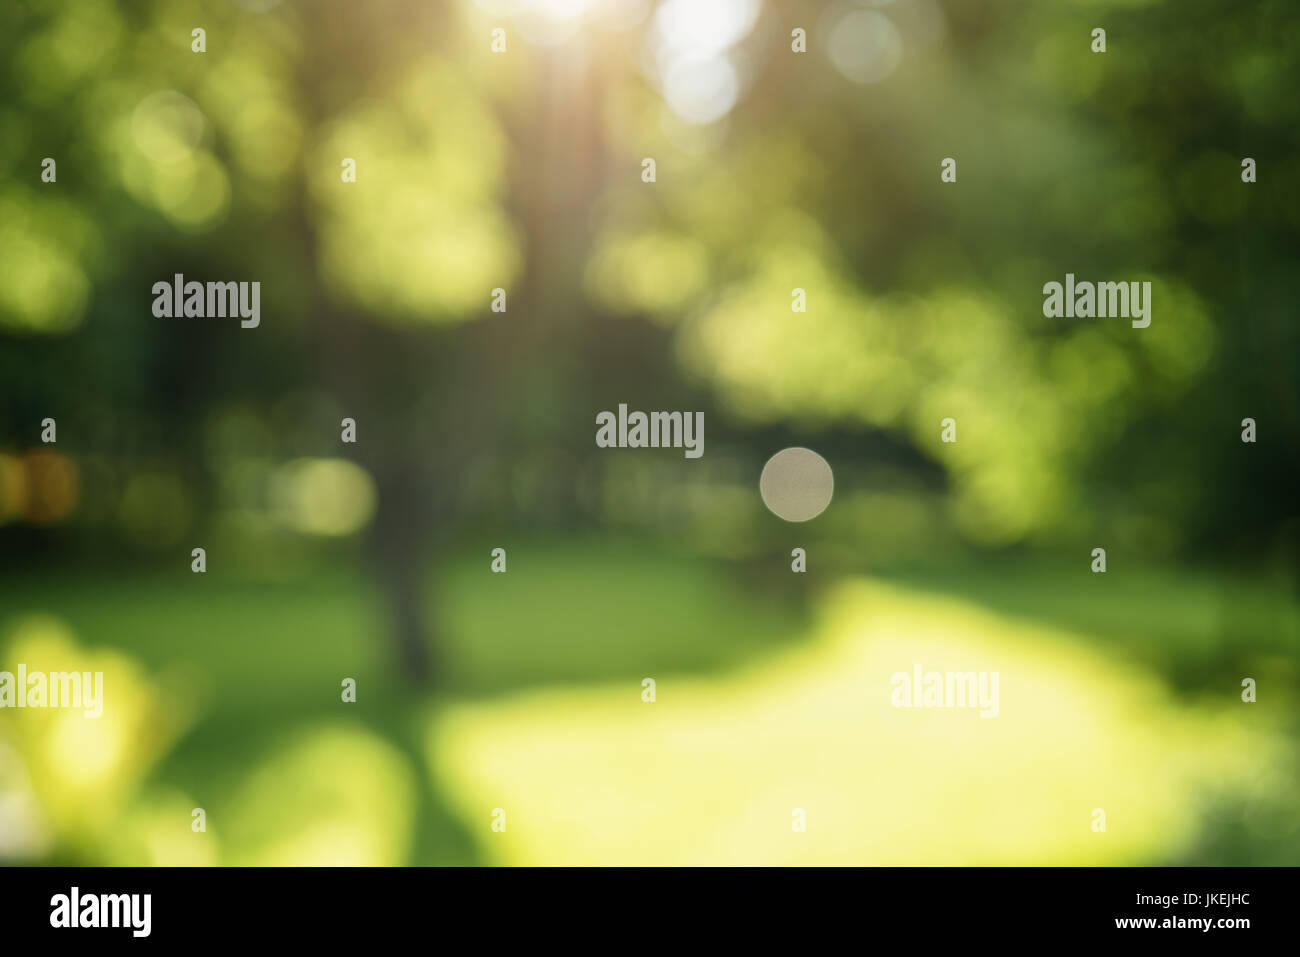 abstract blurred background of trees in park in sunny summer day Stock Photo